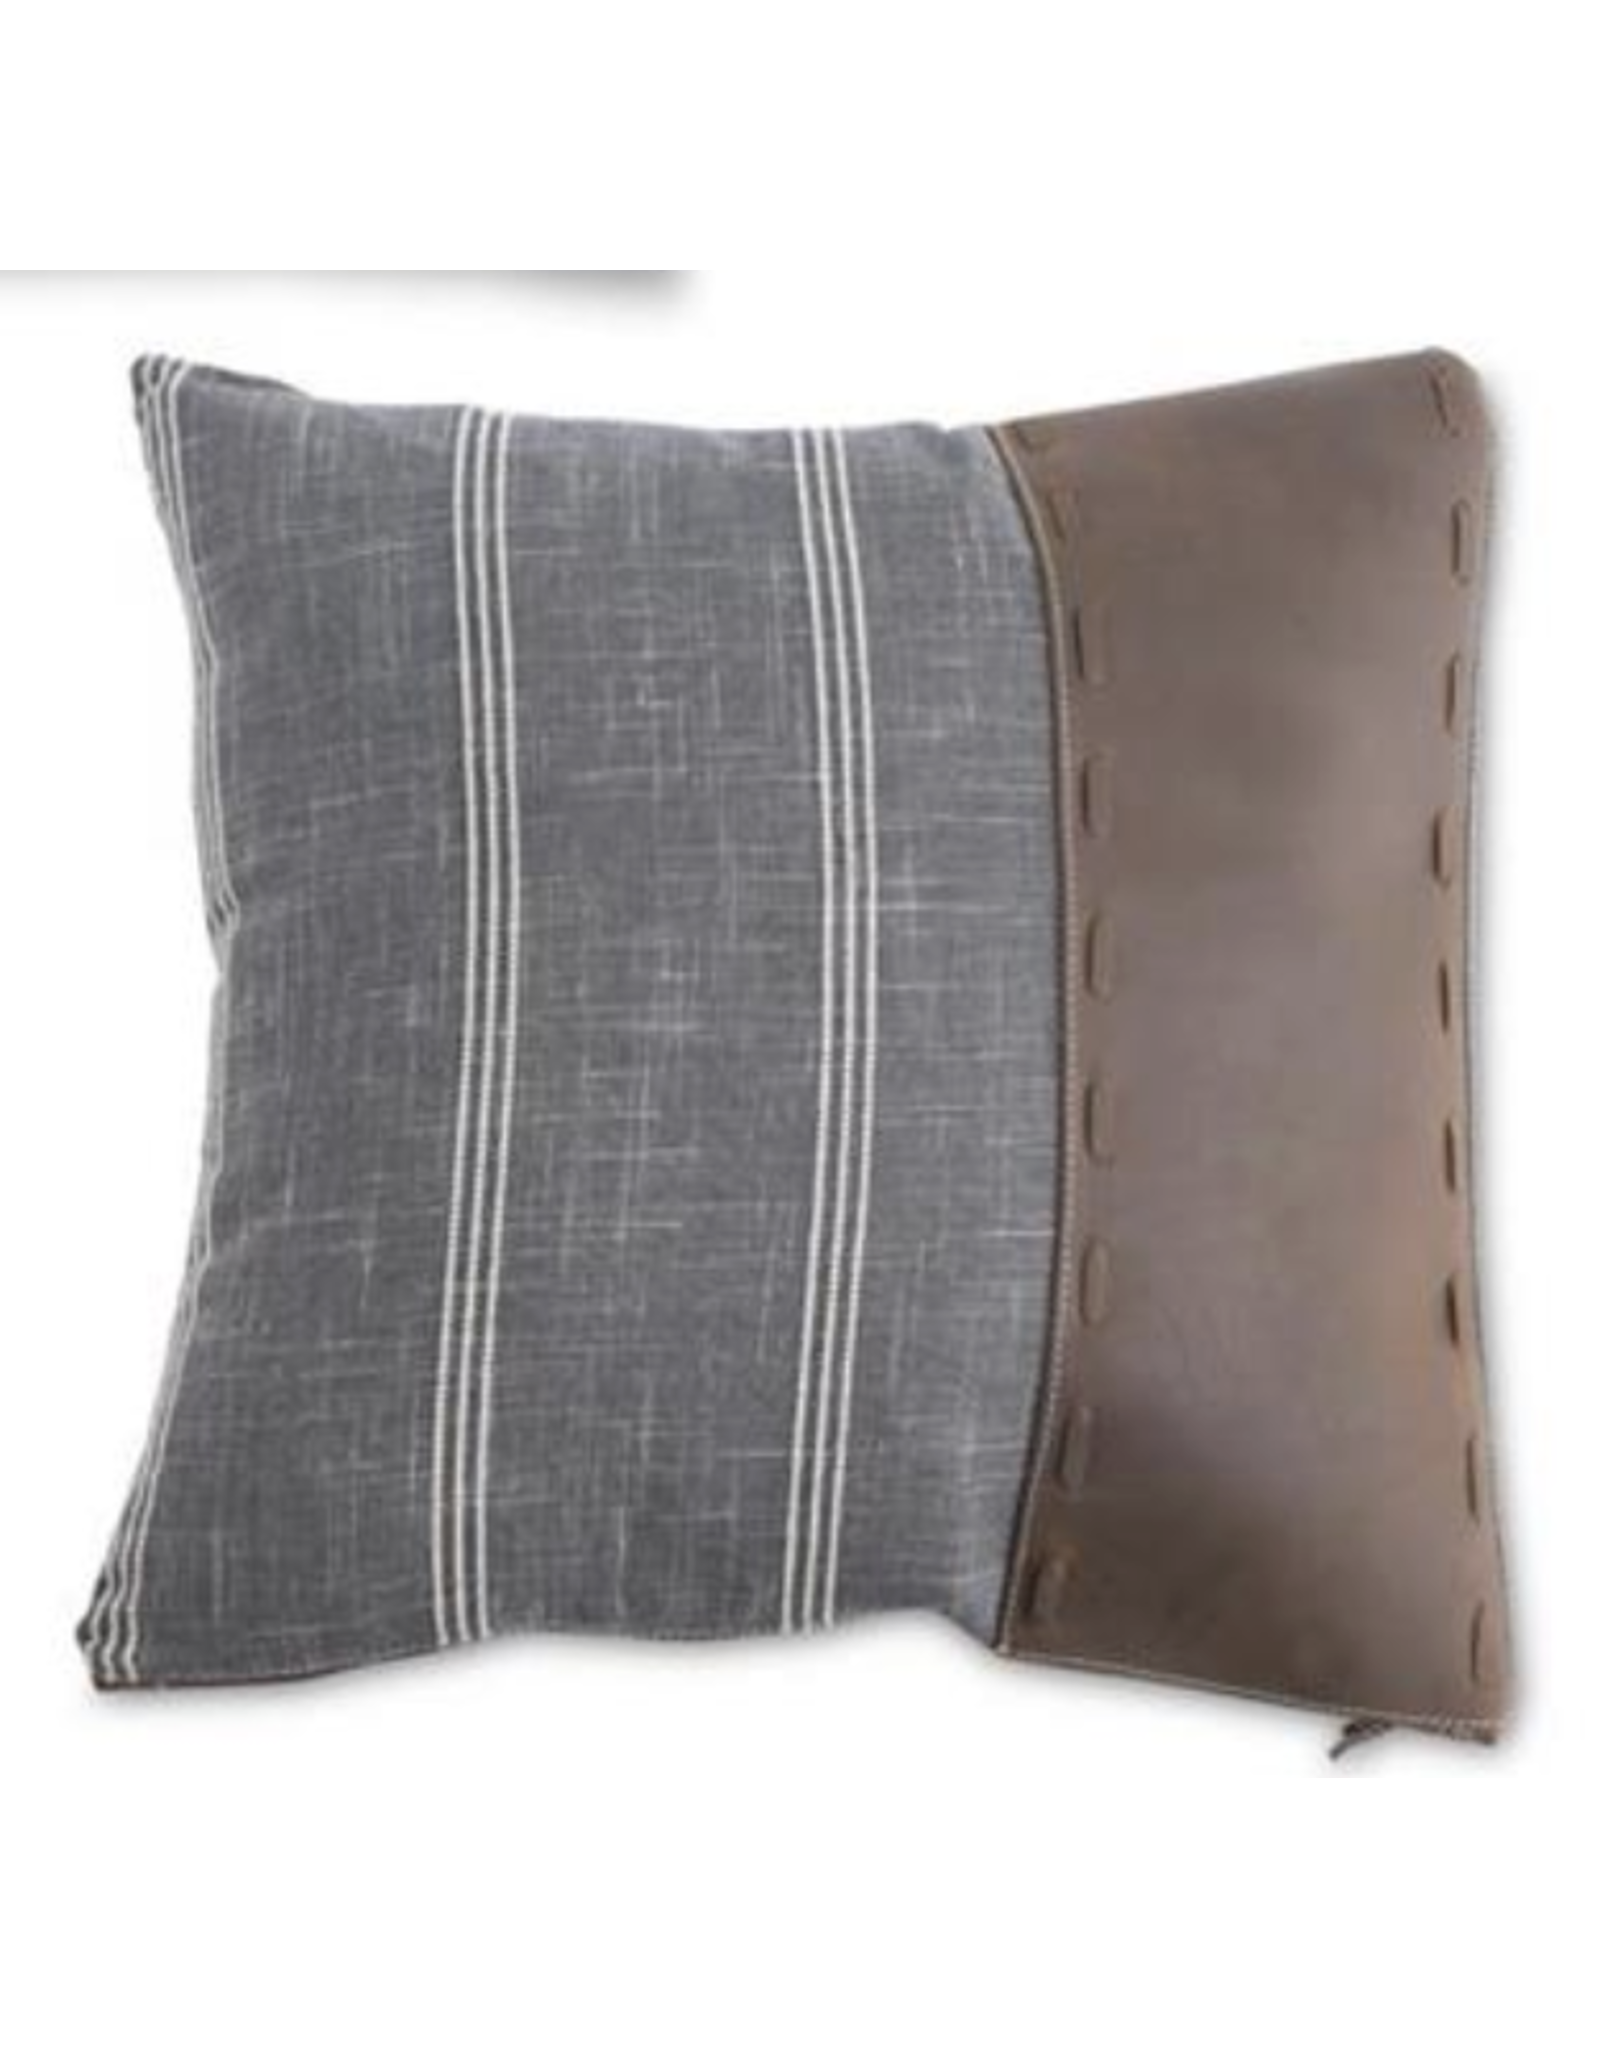 K & K 20" Square Pillow with Leather Accent